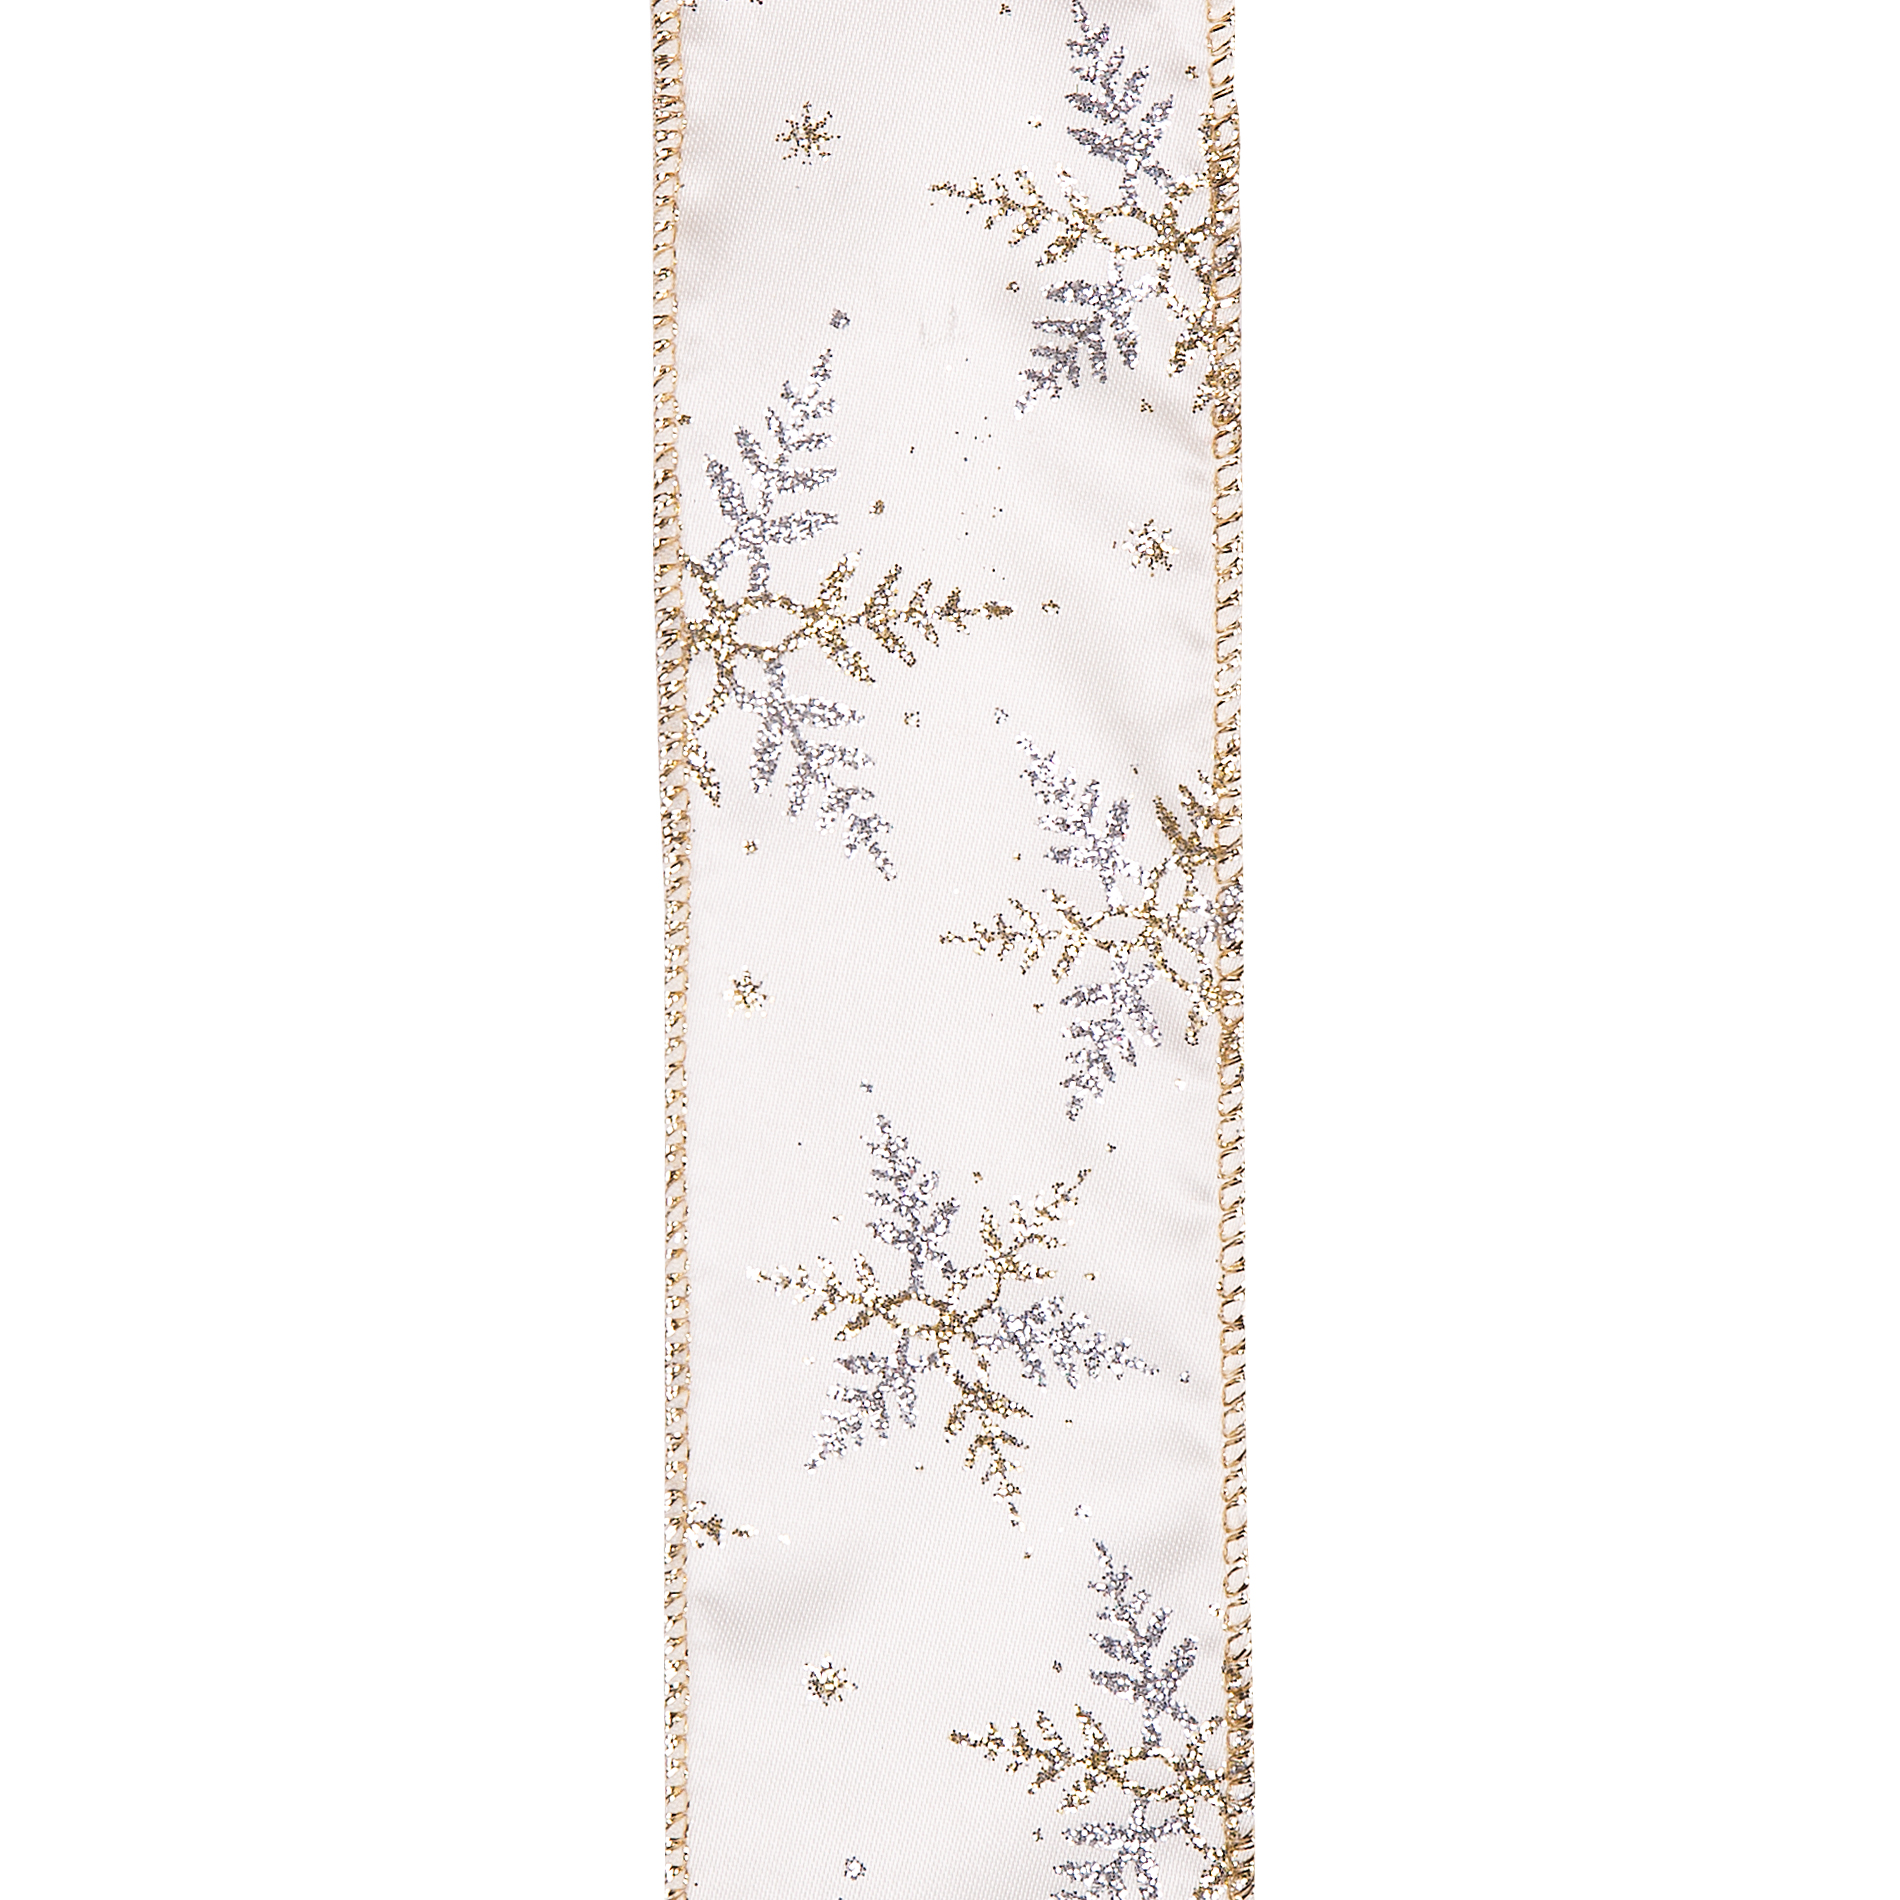 Donner & Blitzen Incorporated 75' Ribbon - White Sheer With Silver And Gold Snowflakes